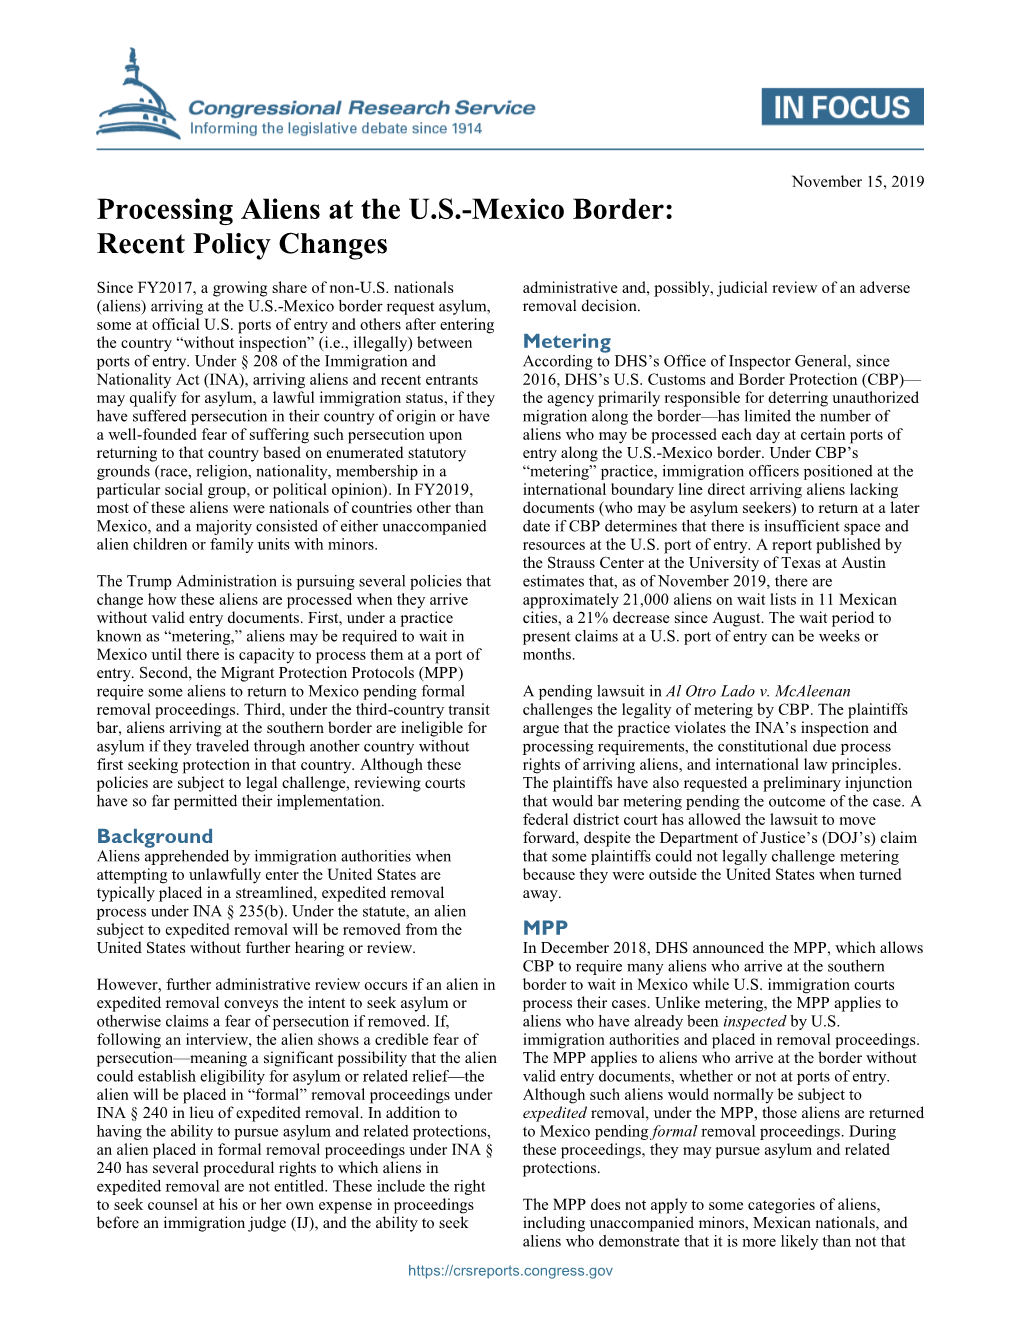 Processing Aliens at the U.S.-Mexico Border: Recent Policy Changes